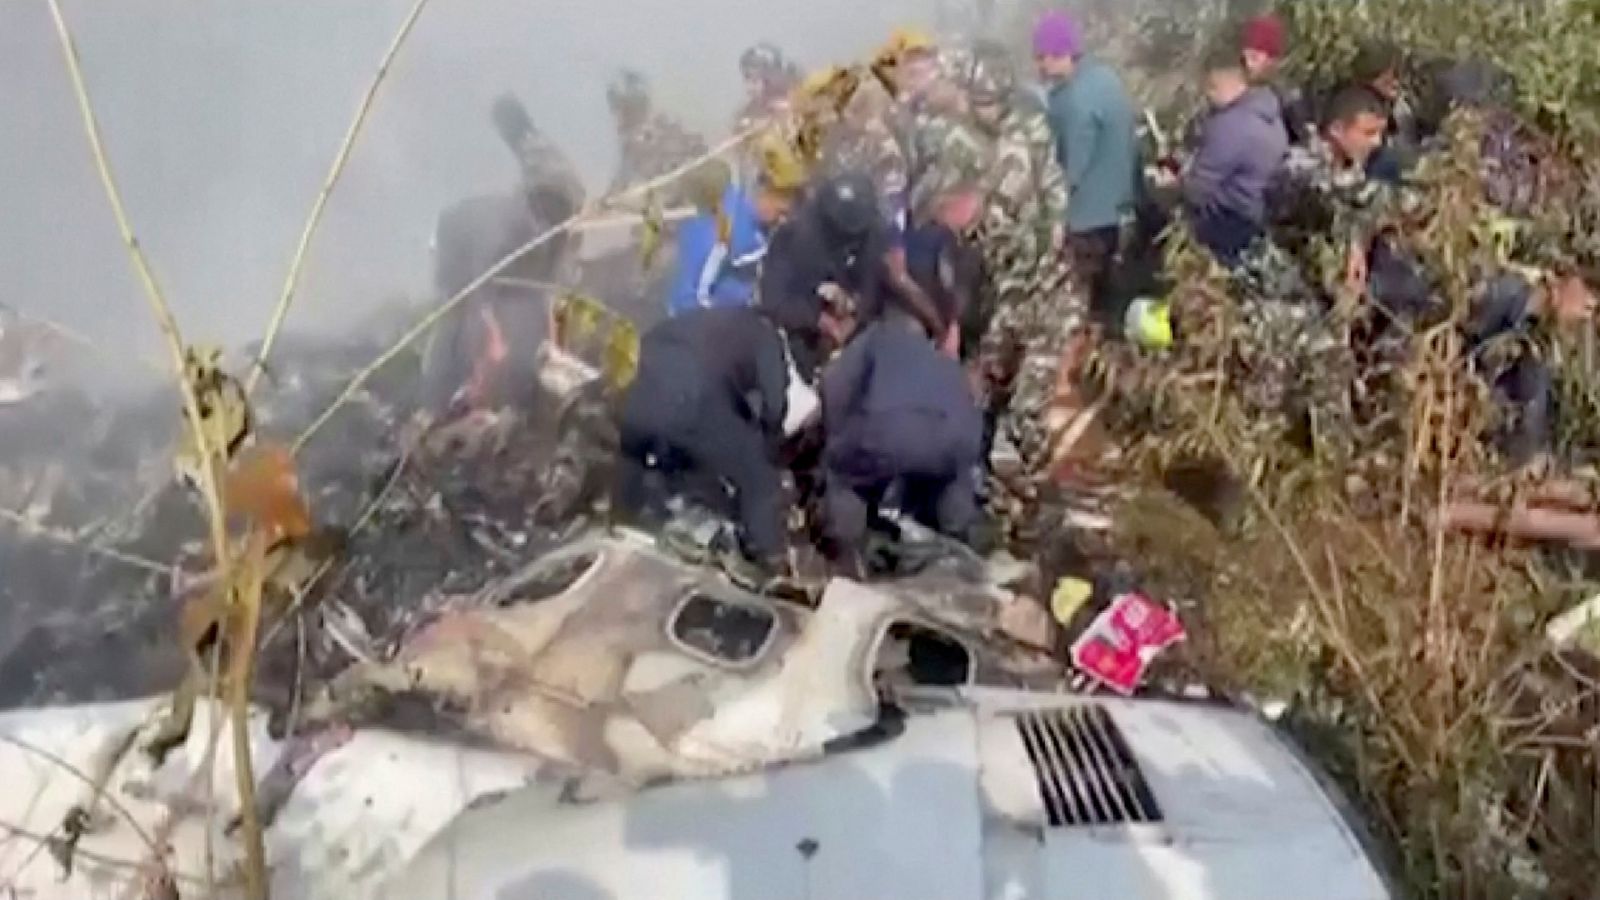 Plane carrying 72 people crashes in Nepal